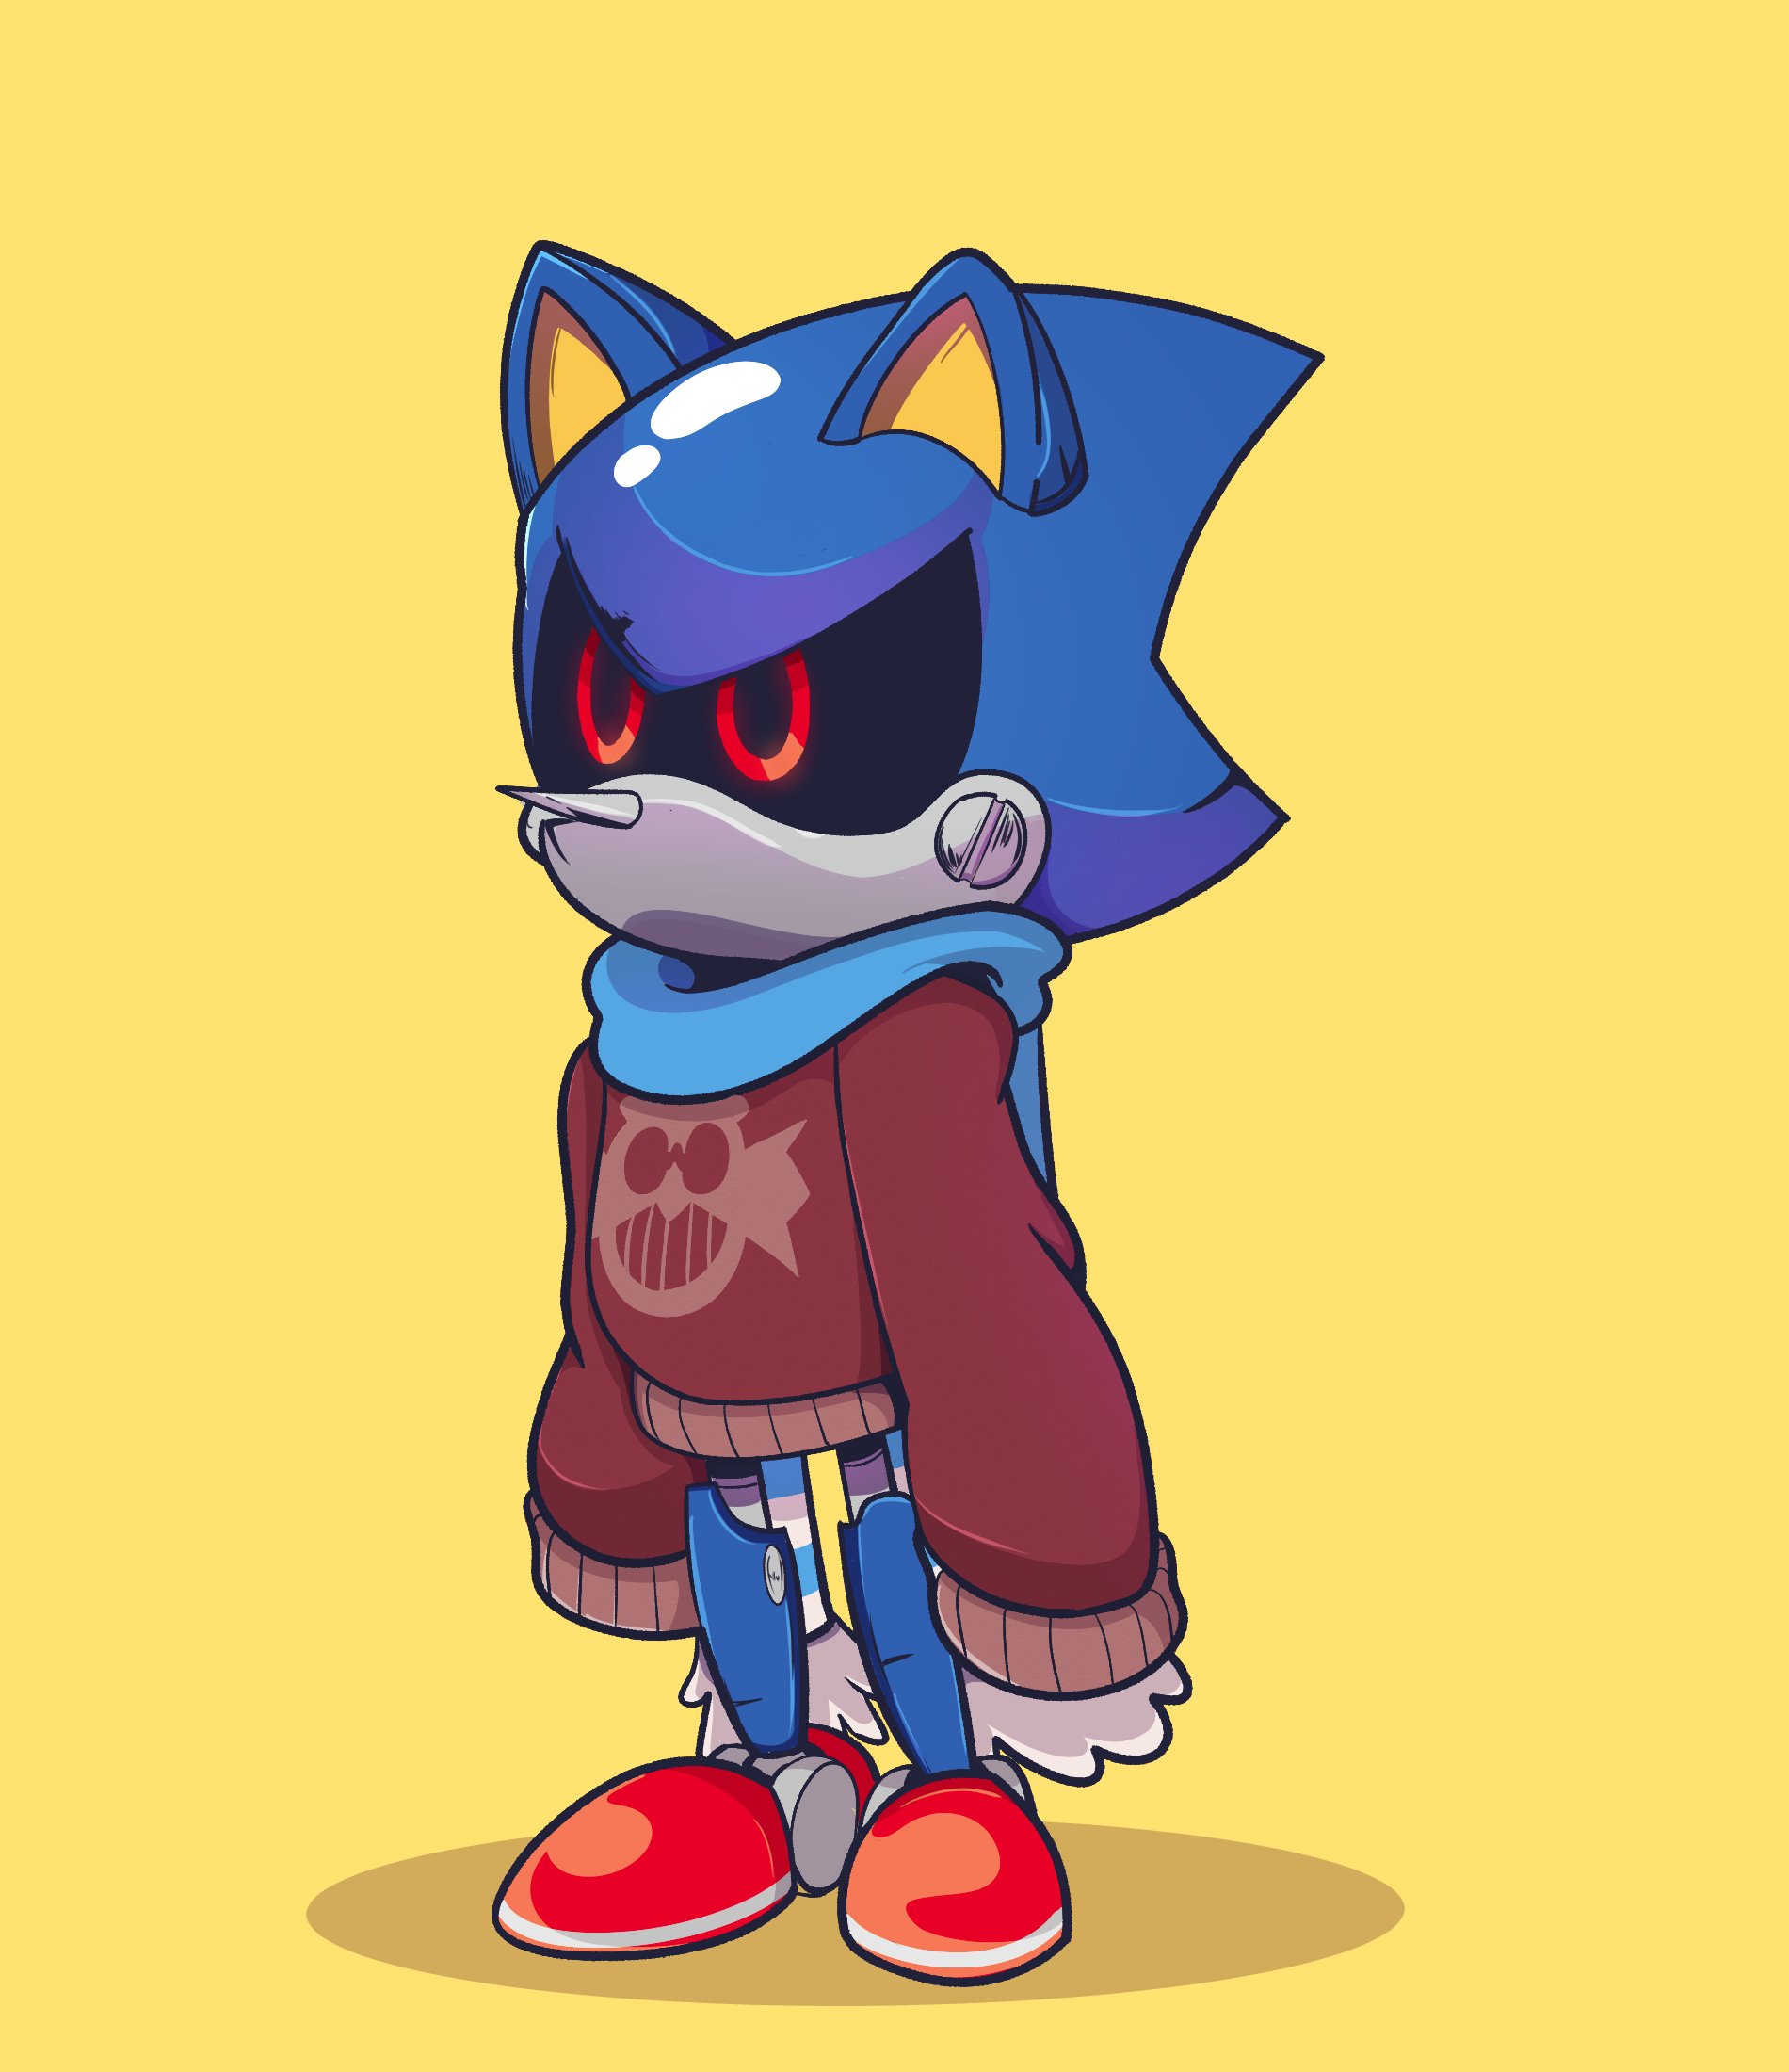 COMMS OPEN🔻Karl0🔻 on X: Ey look, it's Metal Sonic with a scarf